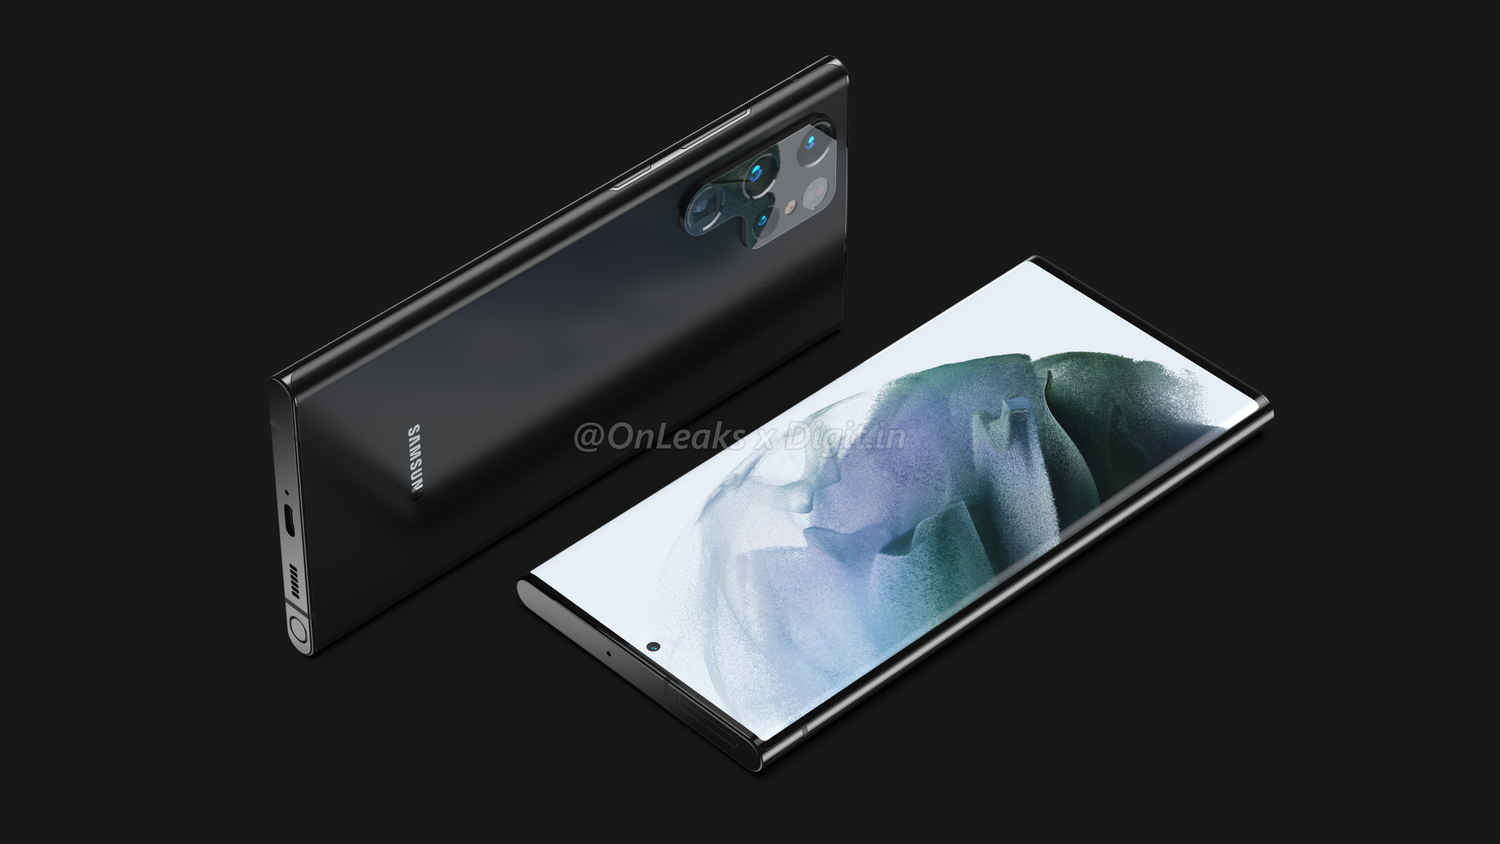 Renders: This is what the Samsung Galaxy S22 Ultra could look like